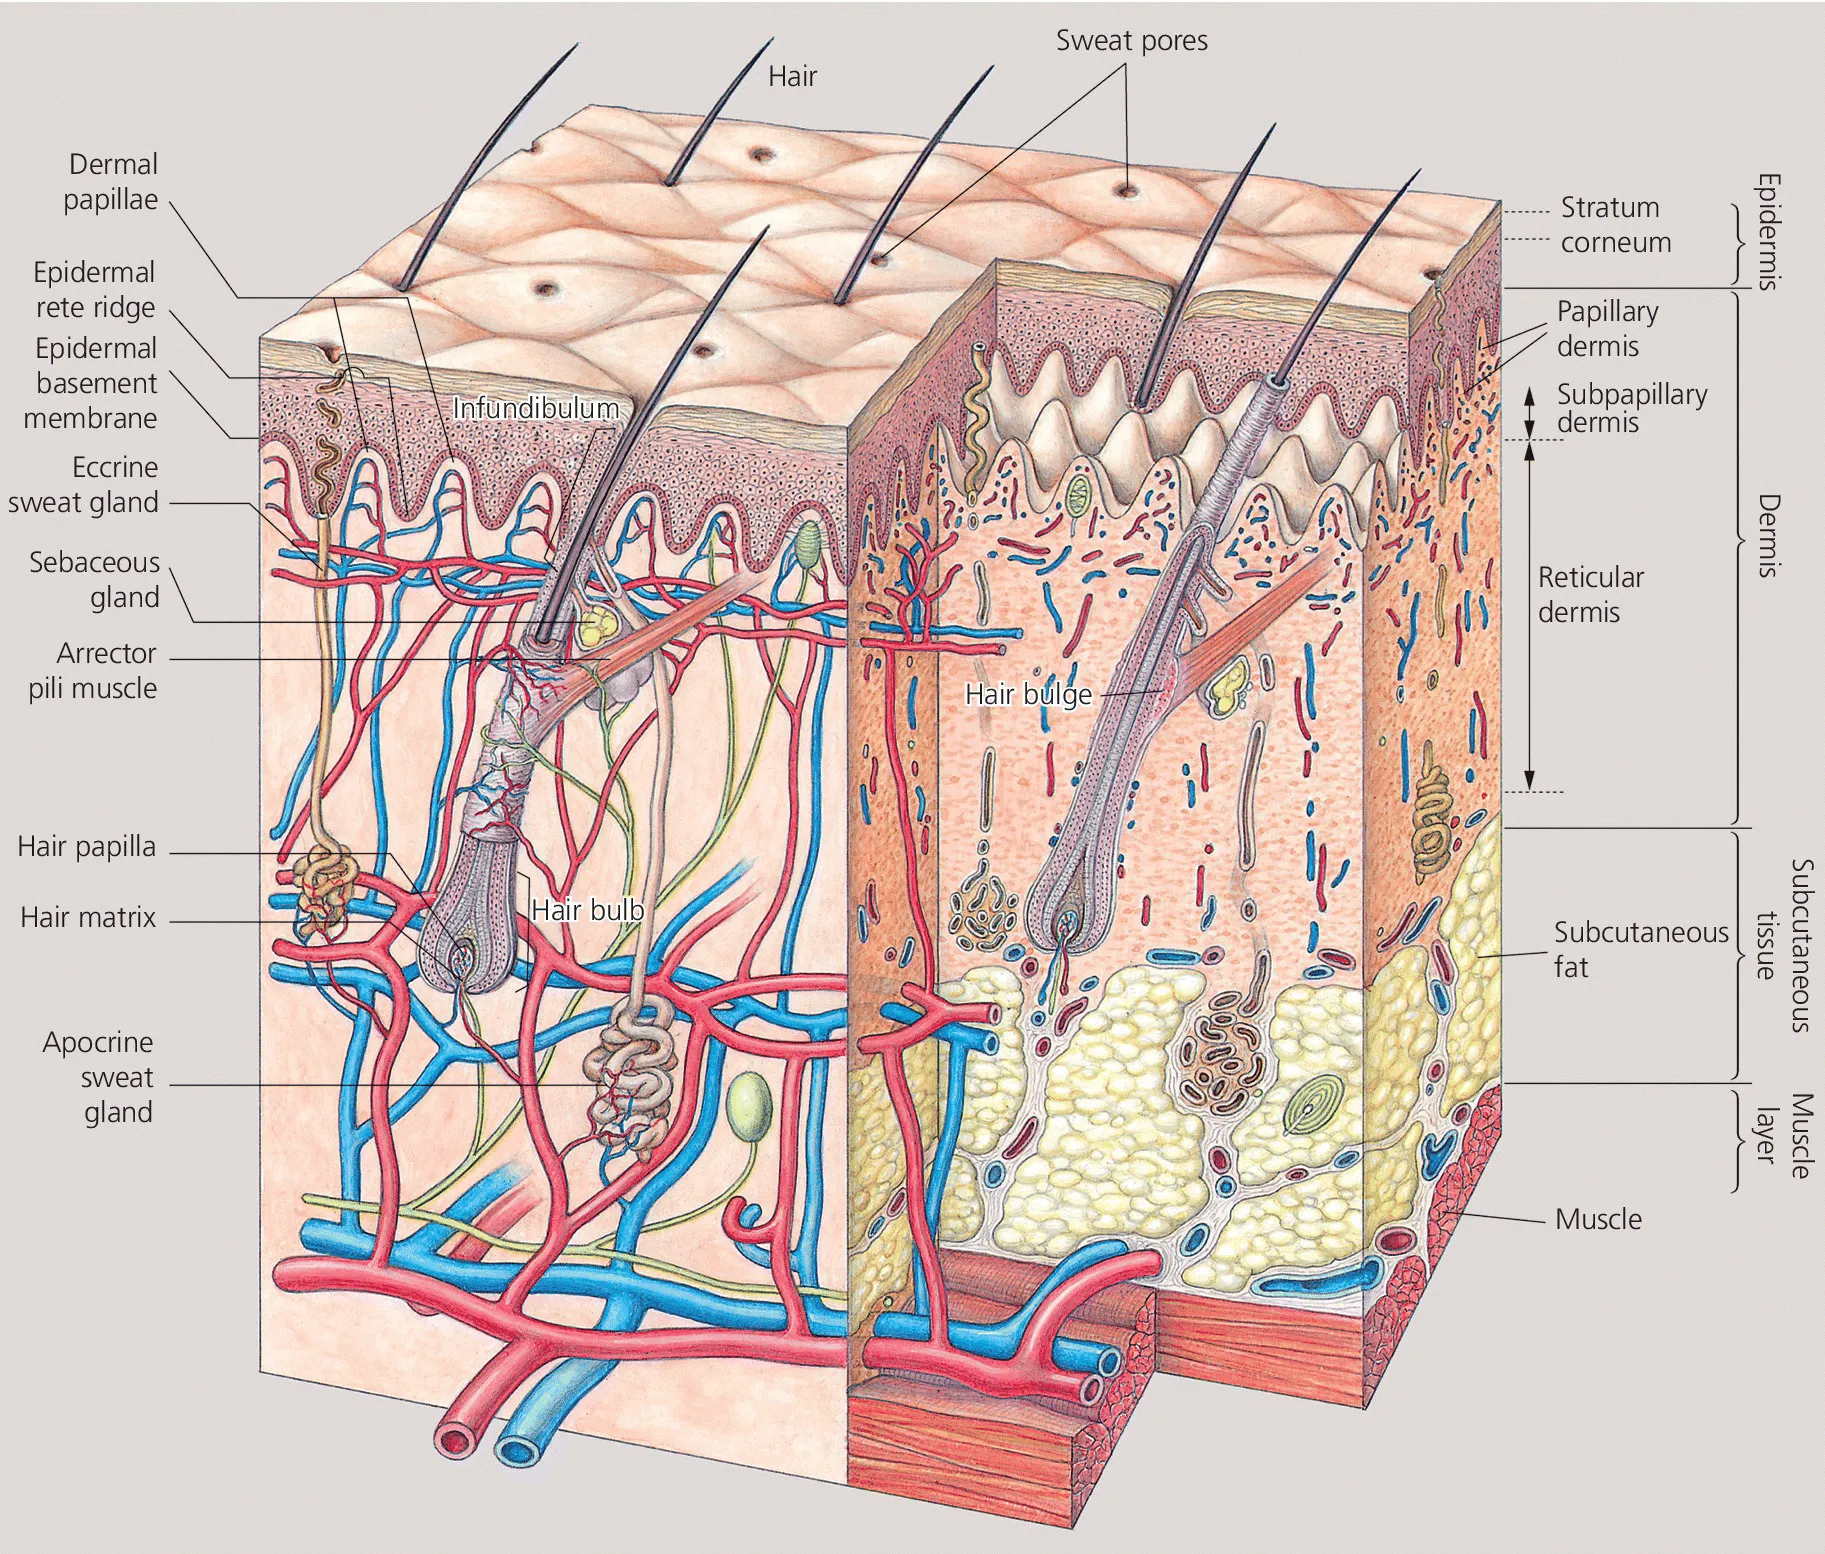 Cross-section of the skin displaying three-layer structure of epidermis, dermis, and subcutaneous tissue, with labels such as, papillary dermis, subcutaneous fat, dermal papilla, and sebaceous gland.